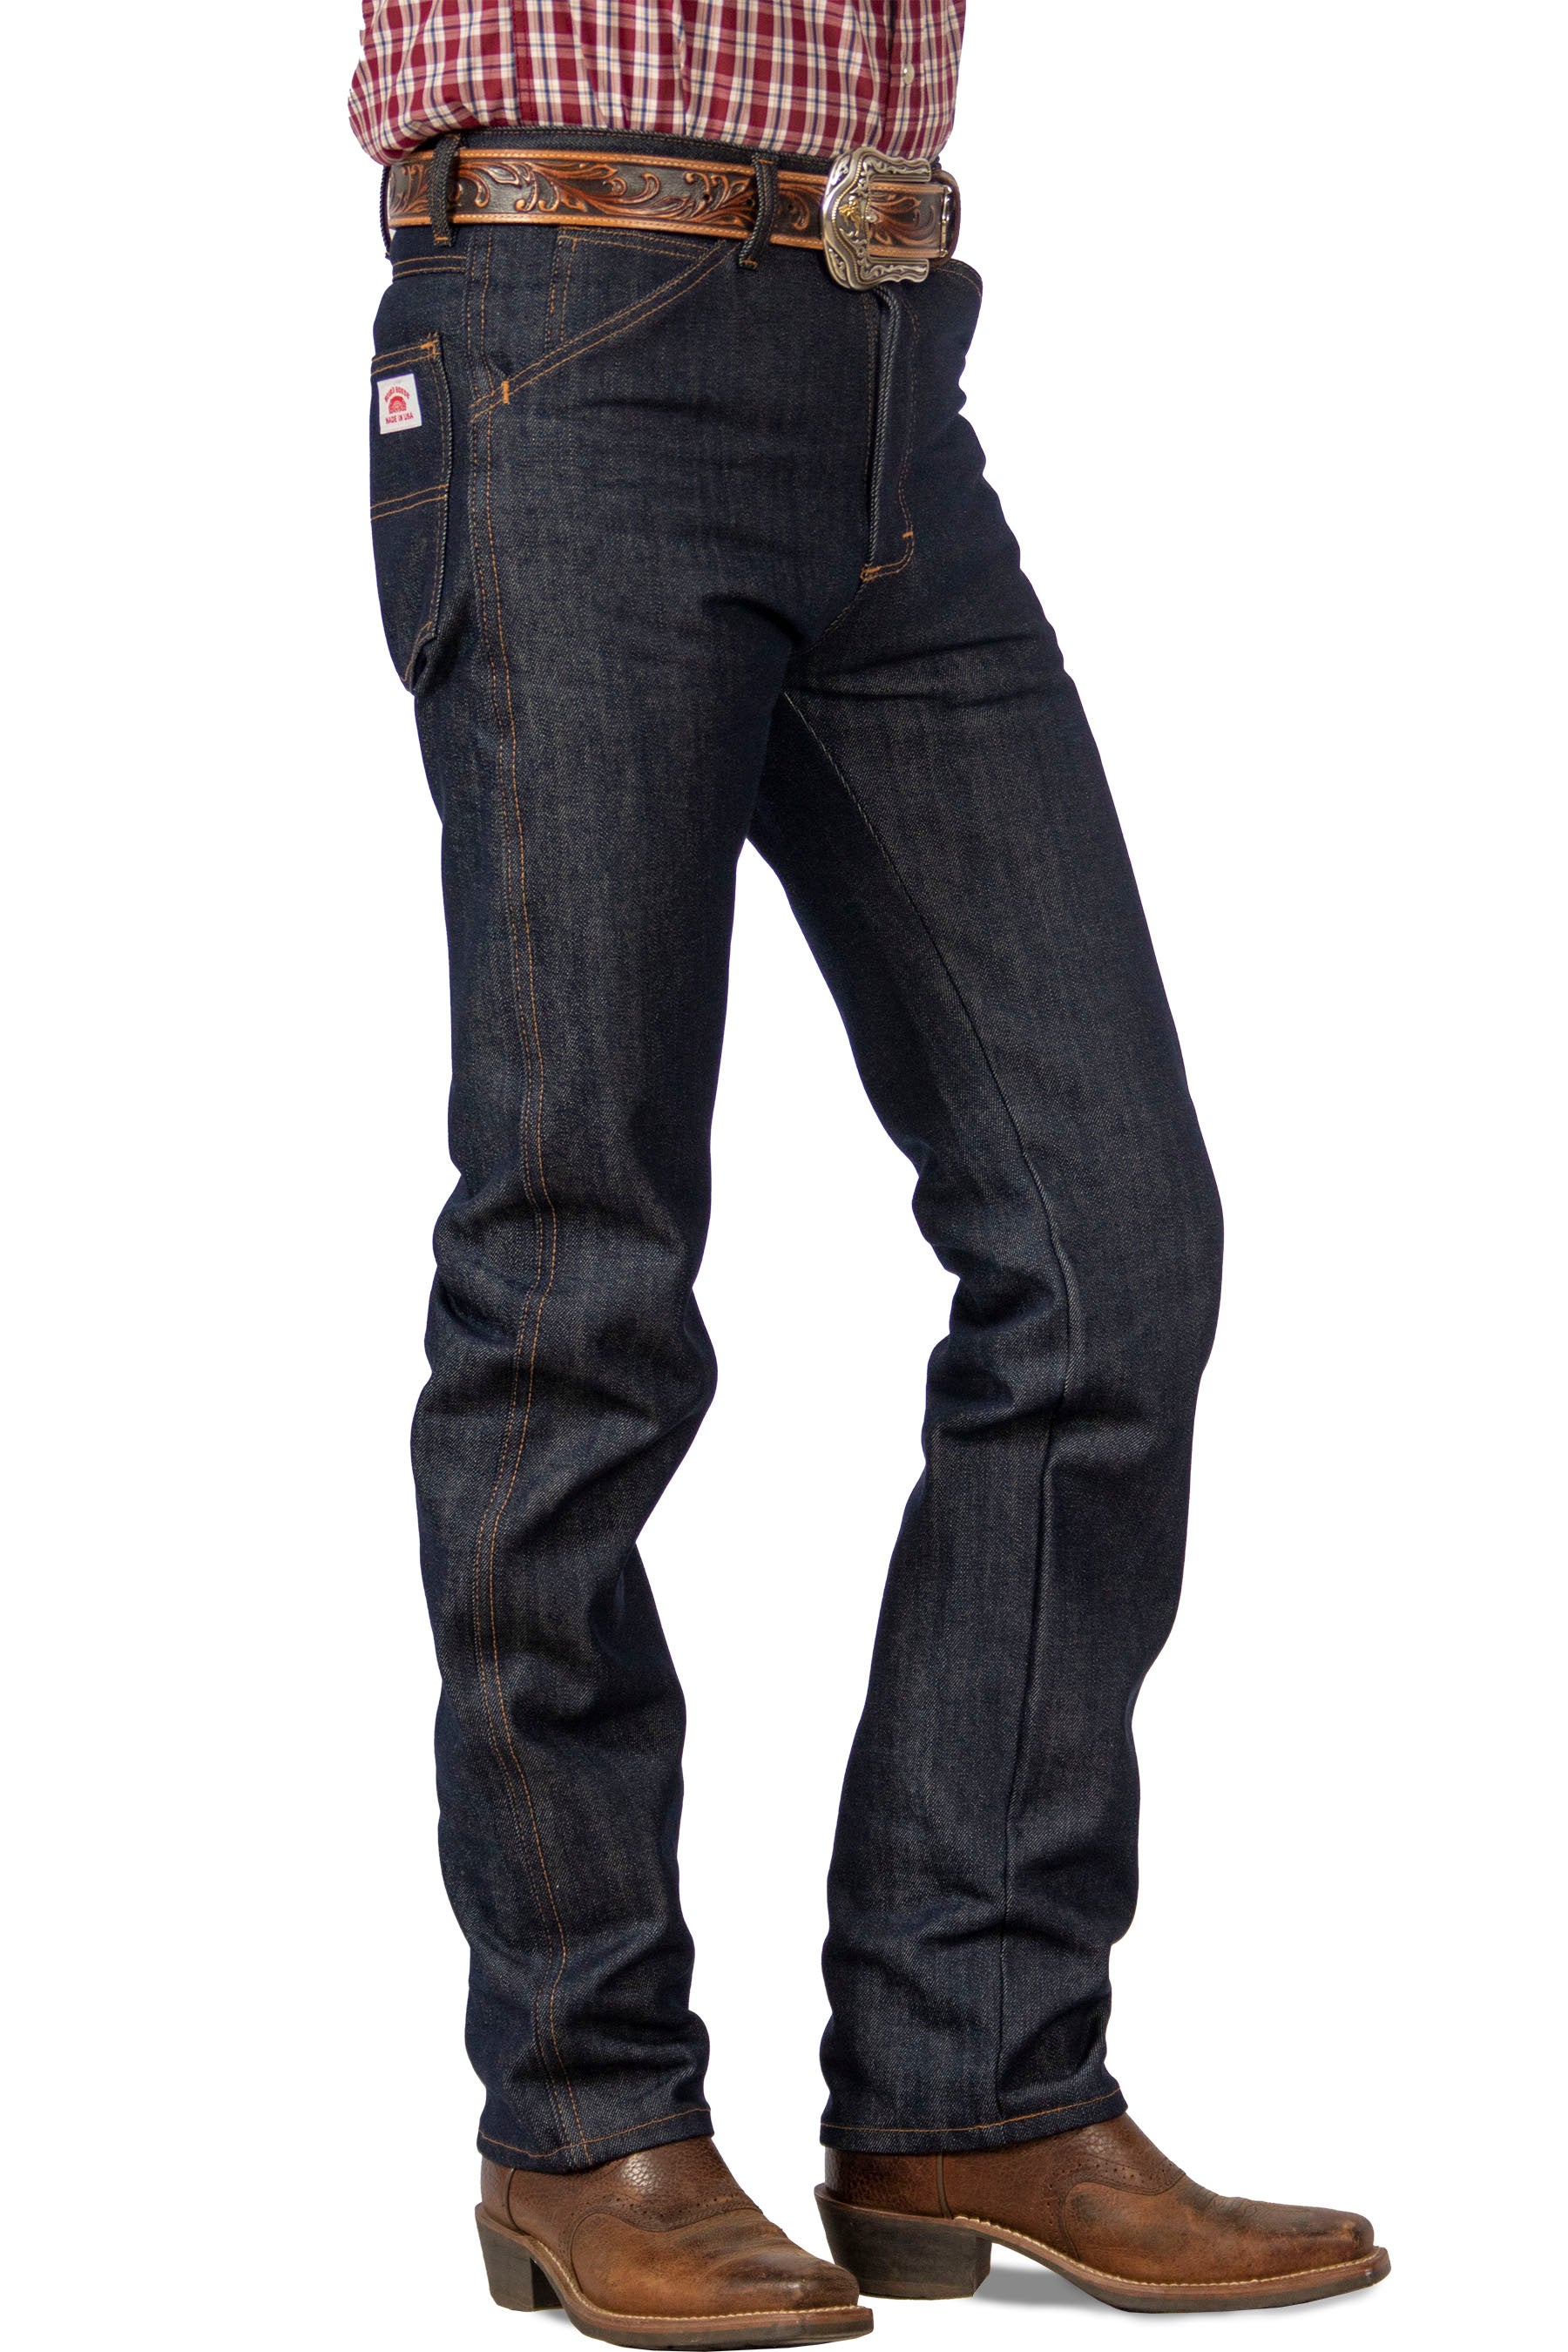 #1951 American Made Jeans Cowboy Slim Fit 14 oz Jeans Made in USA ...